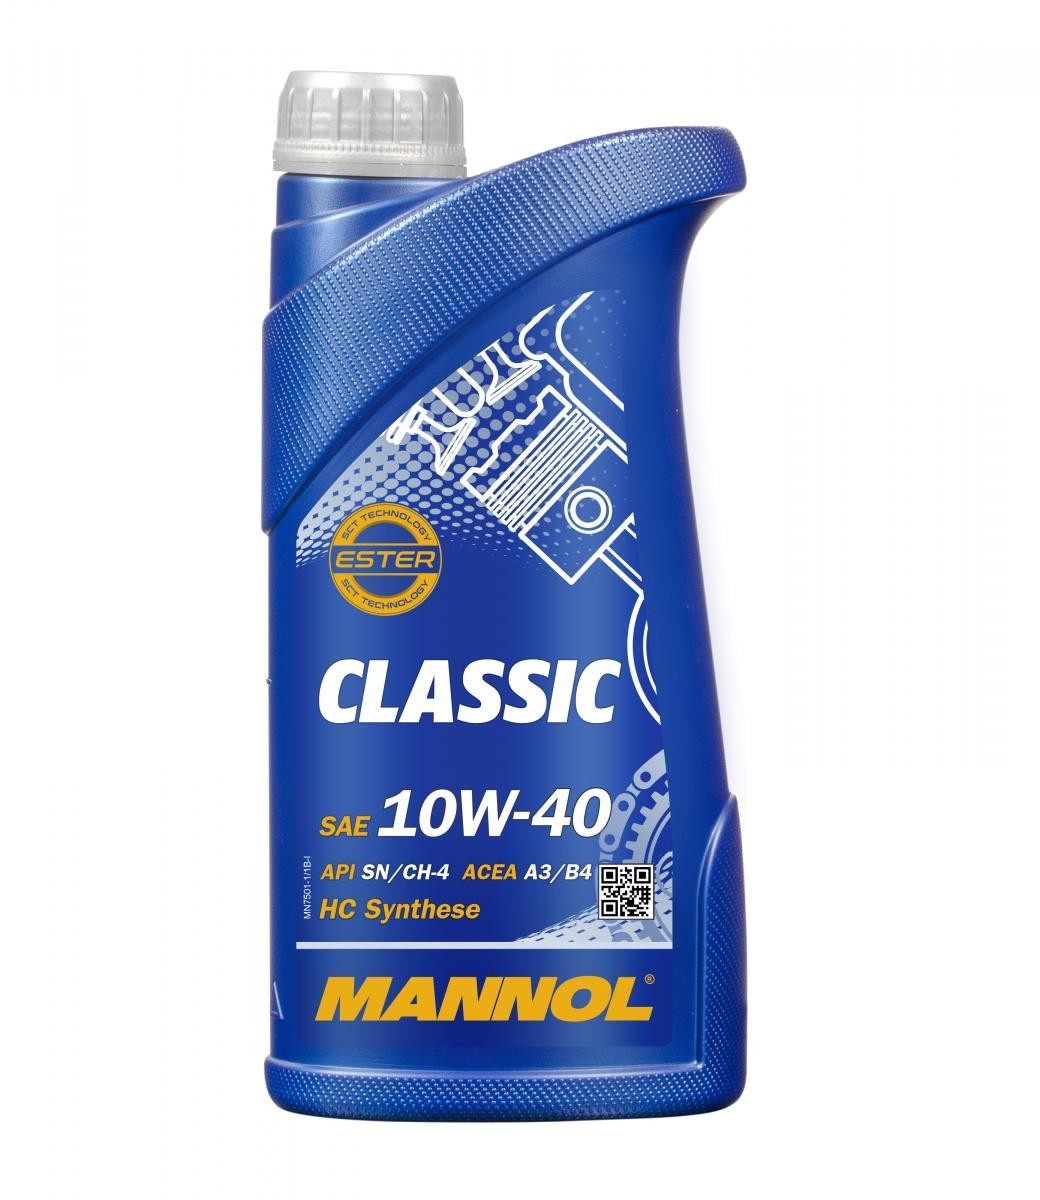 Engine oil MN7501-1 MANNOL ContiClassic 10W-40, 1l, Part Synthetic Oil